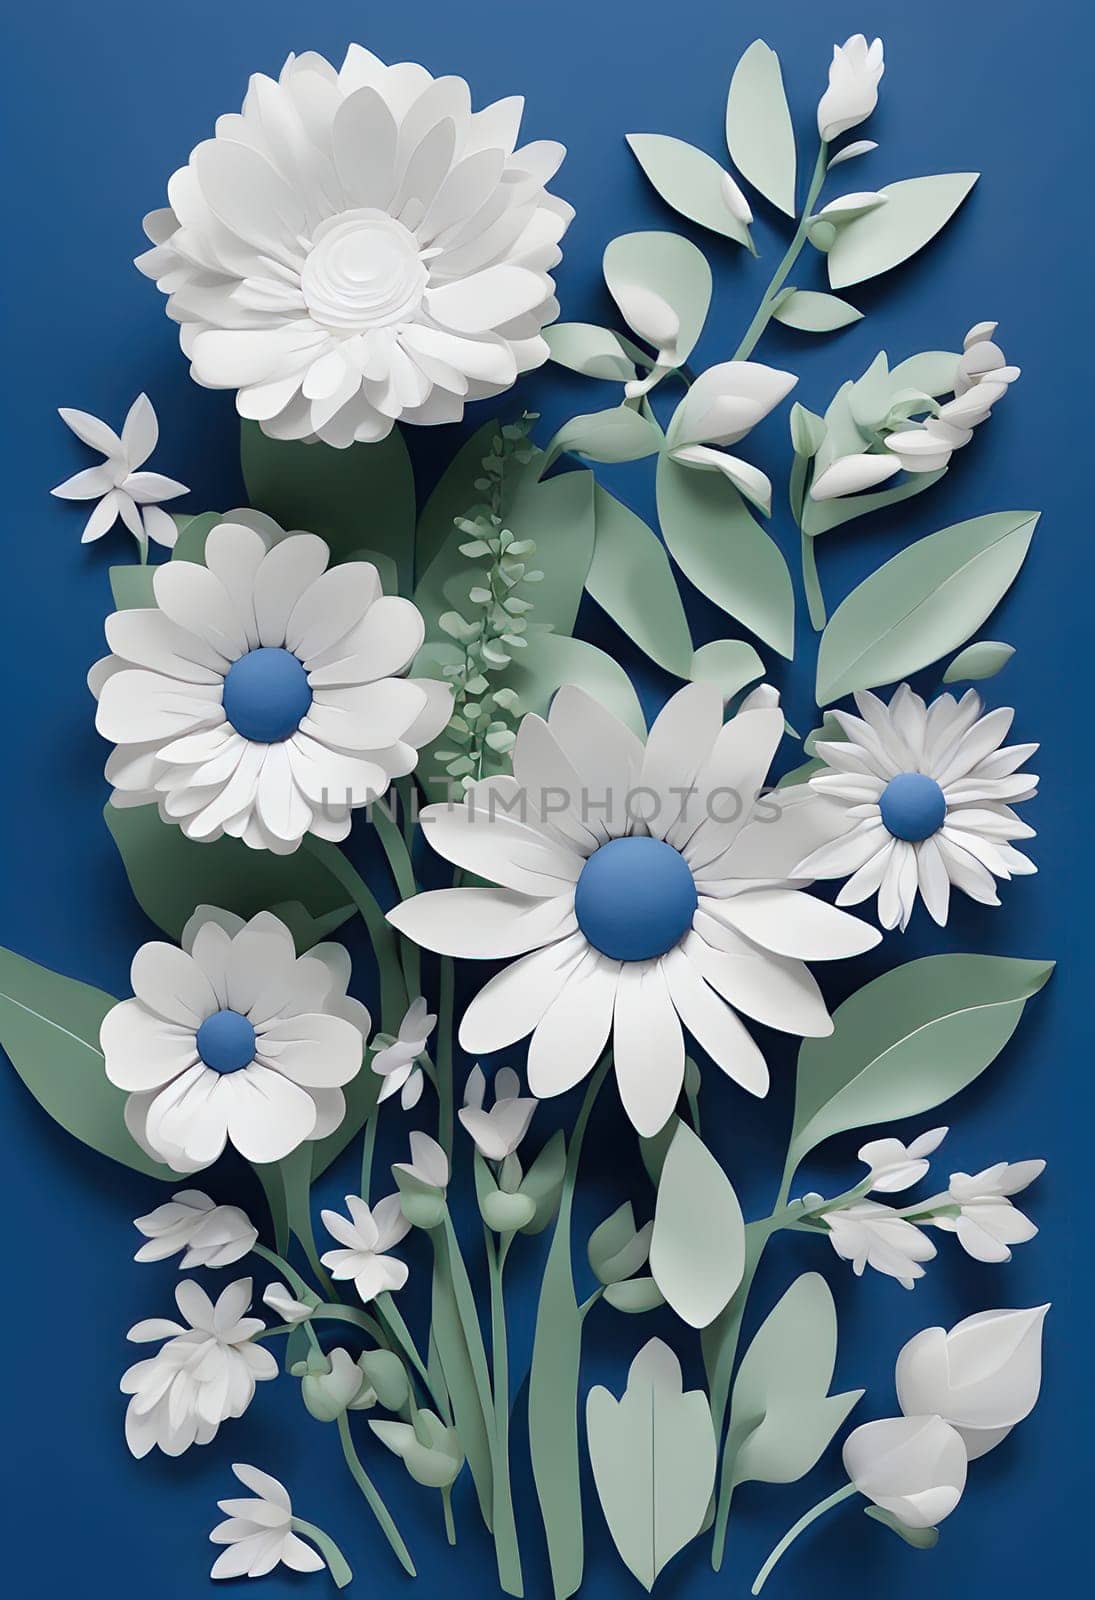 The image shows a 3D painting of white and blue flowers on a blue background. The flowers are of different sizes and shapes and are surrounded by green leaves. Generate AI